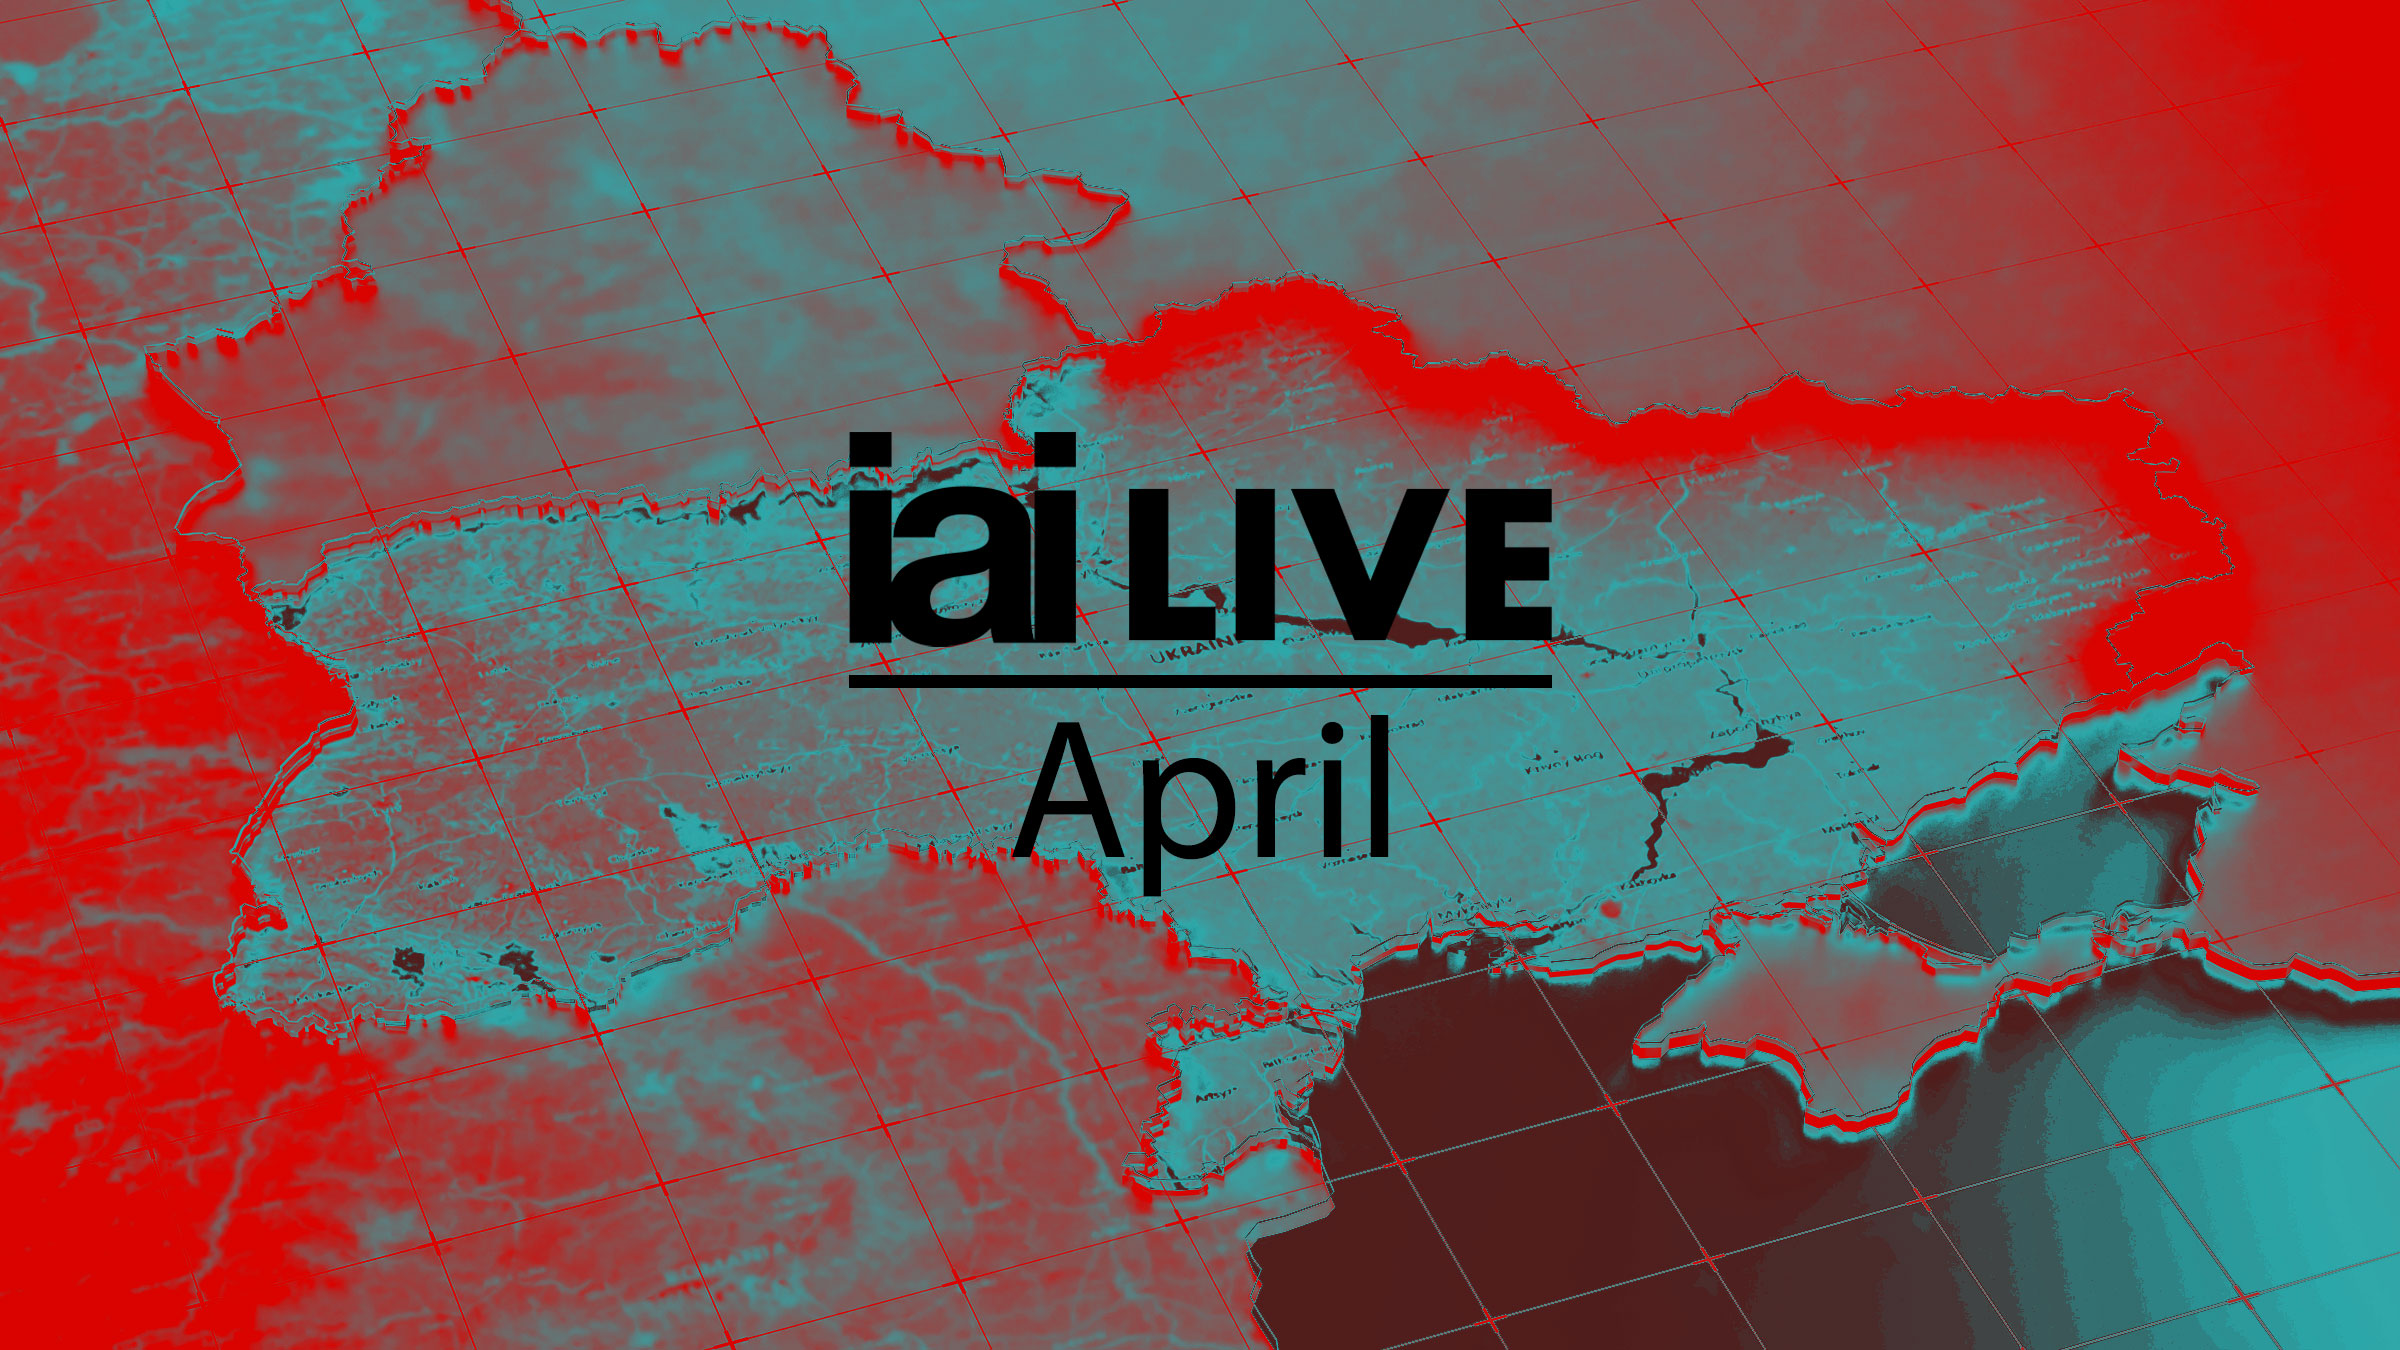 IAI Live April - The Enemy At The Gates